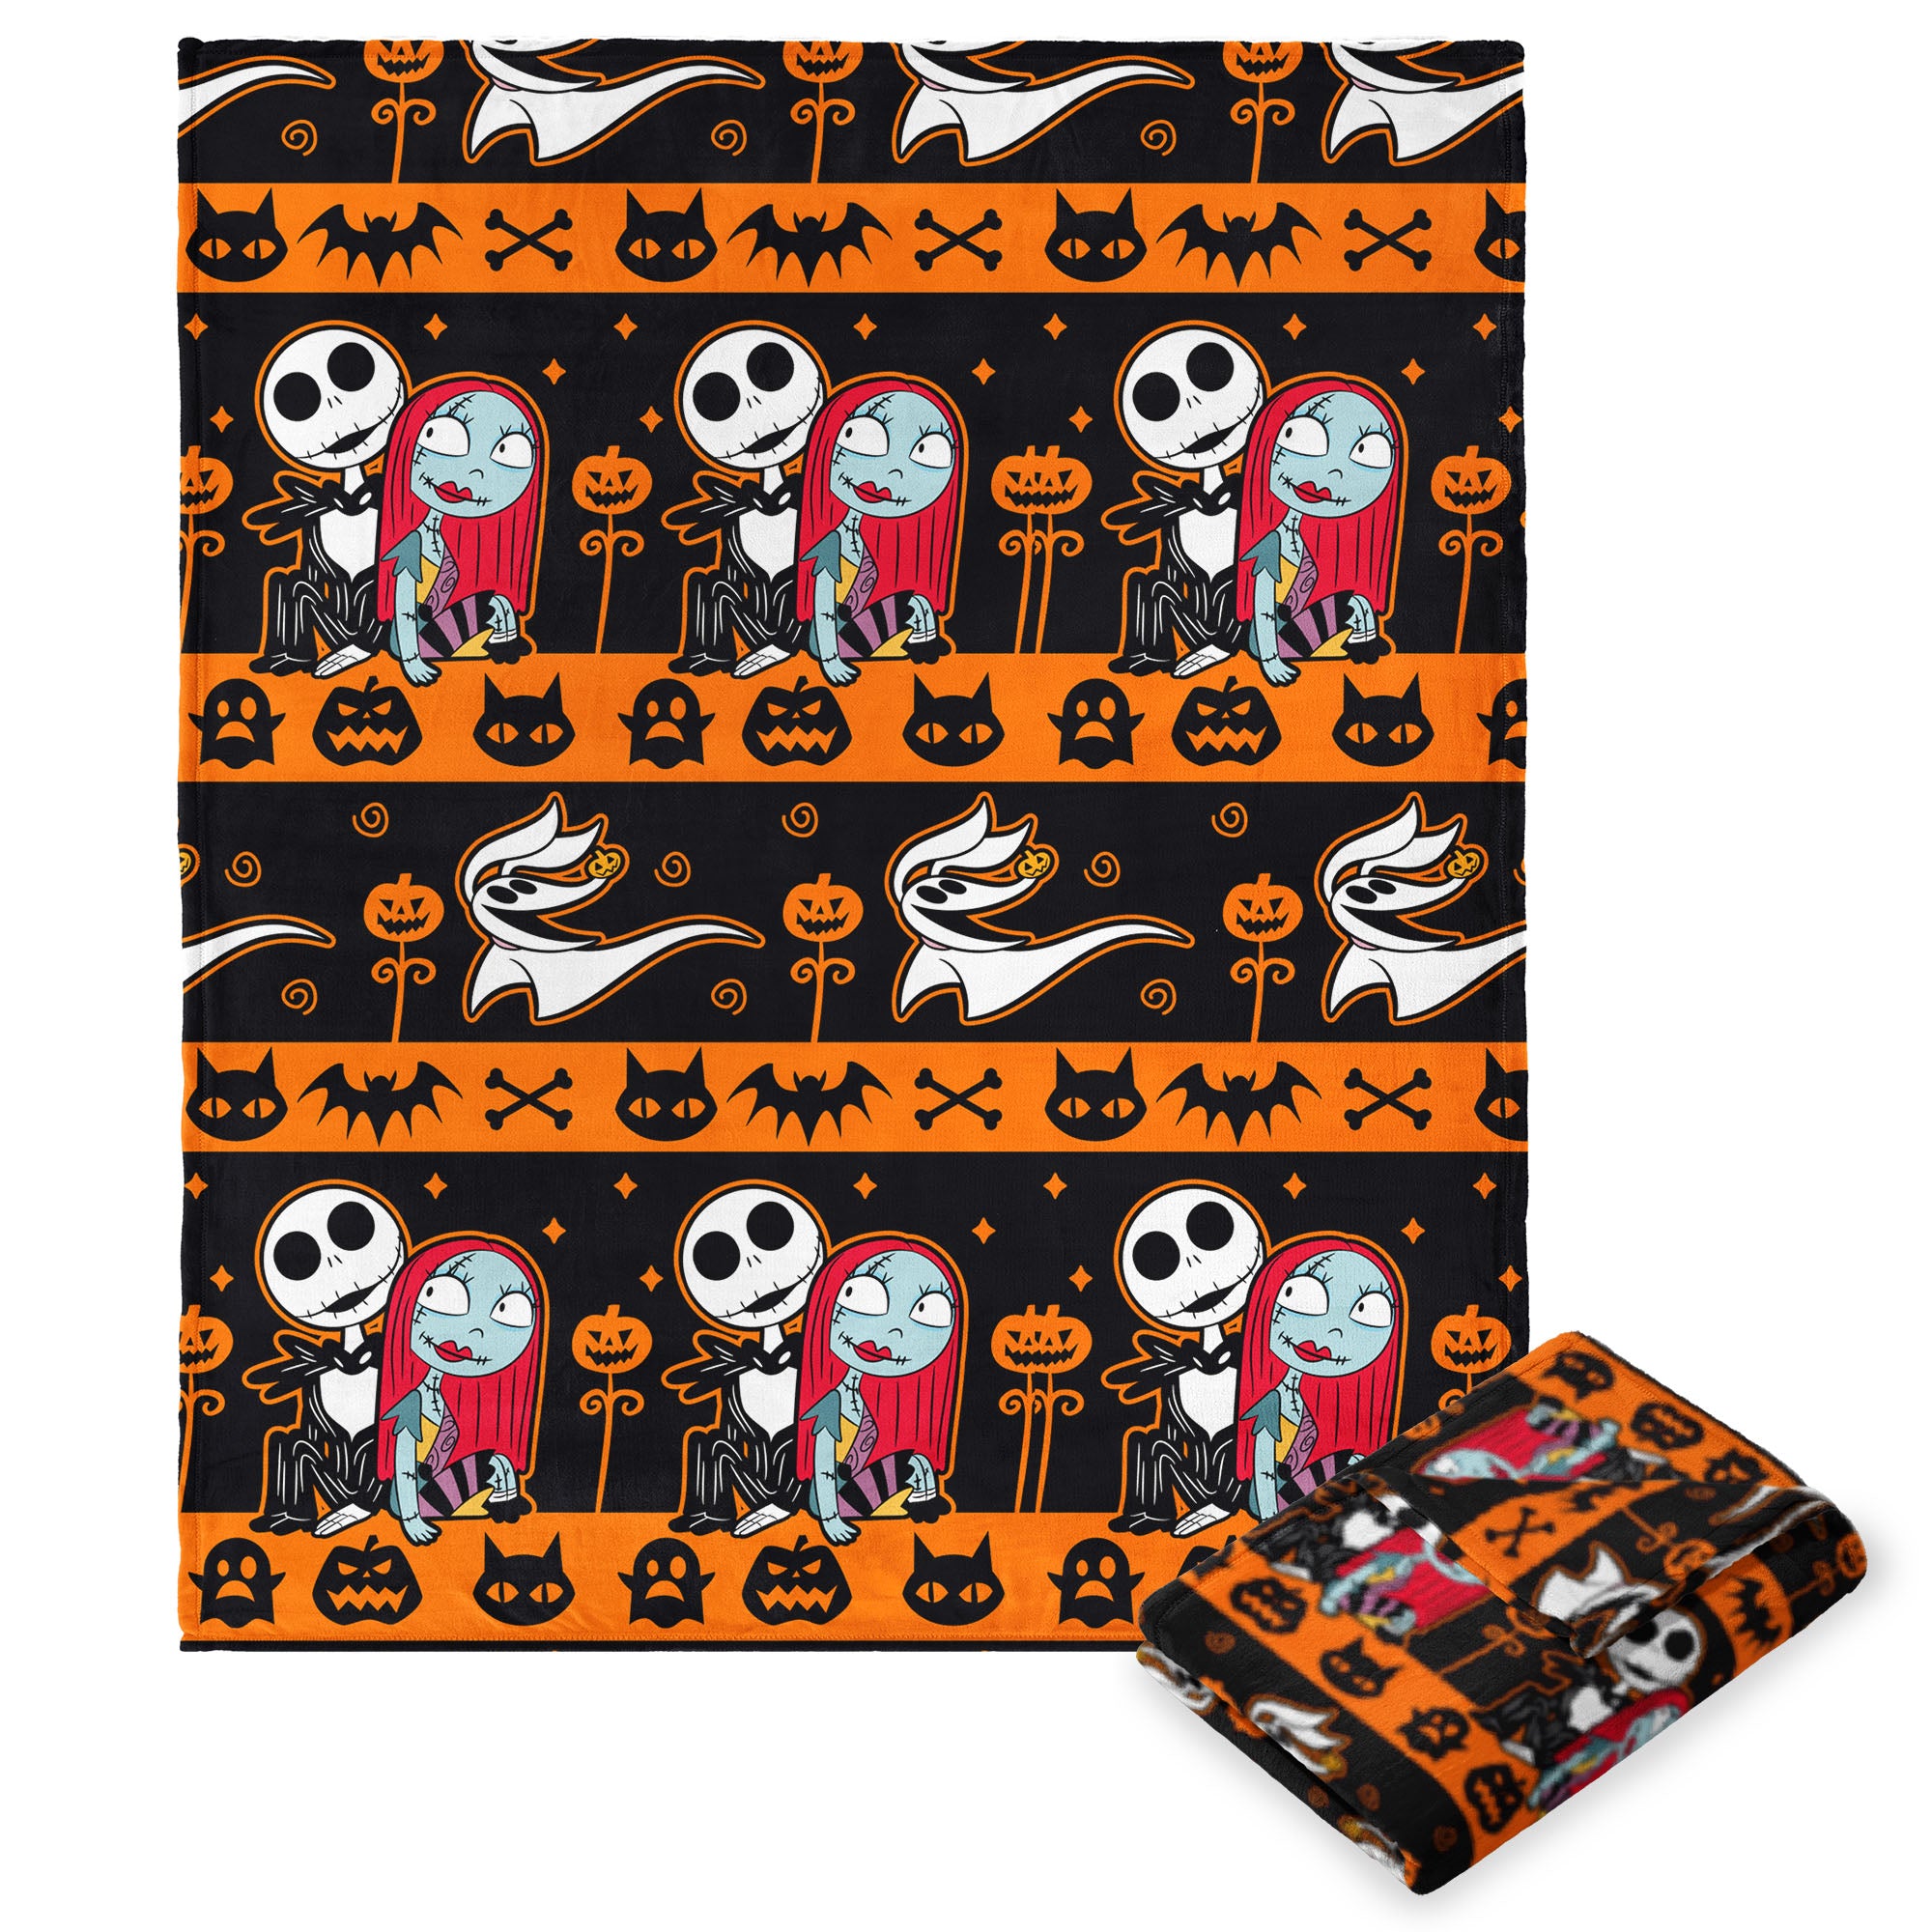 Disney Nightmare Before Christmas Striped Nightmare Silk Touch Throw Blanket 50x70 Inches